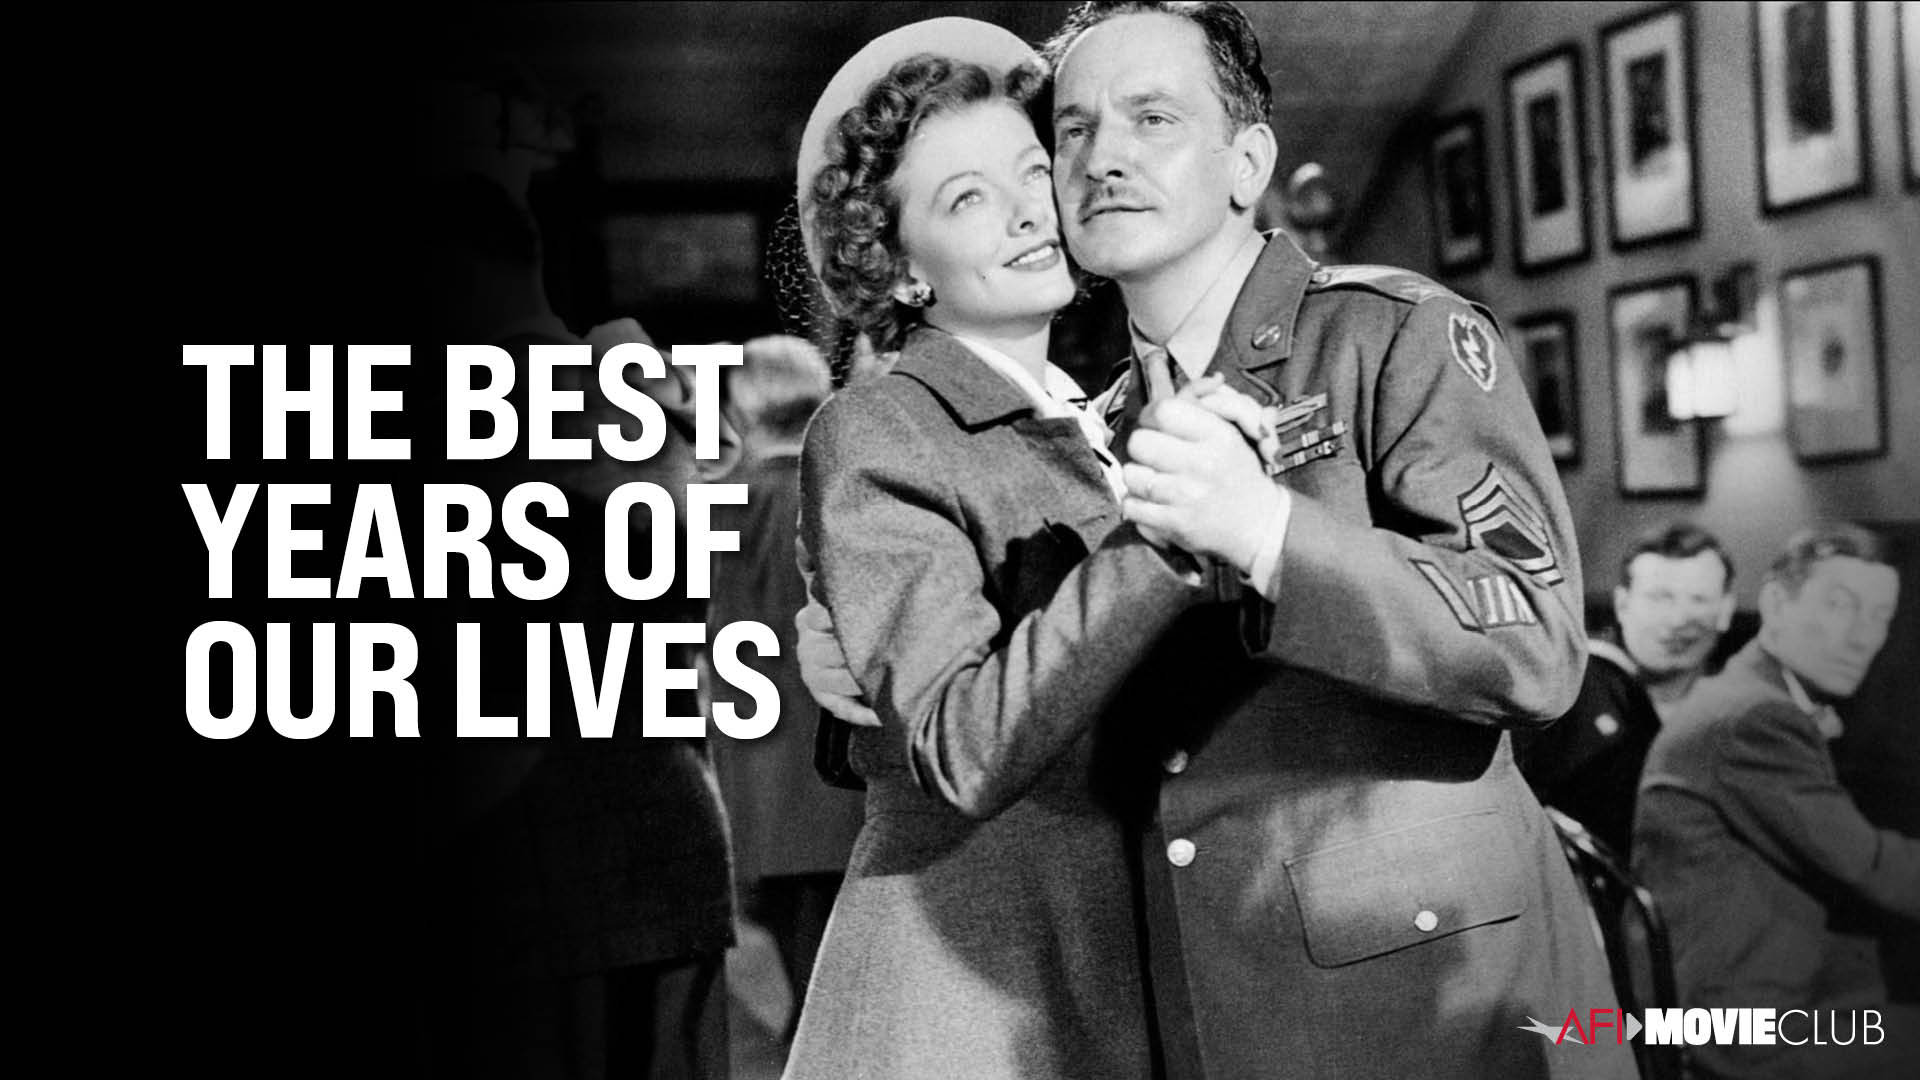 The Best Years of Our Lives Film Still - Dana Andrews and Teresa Wright